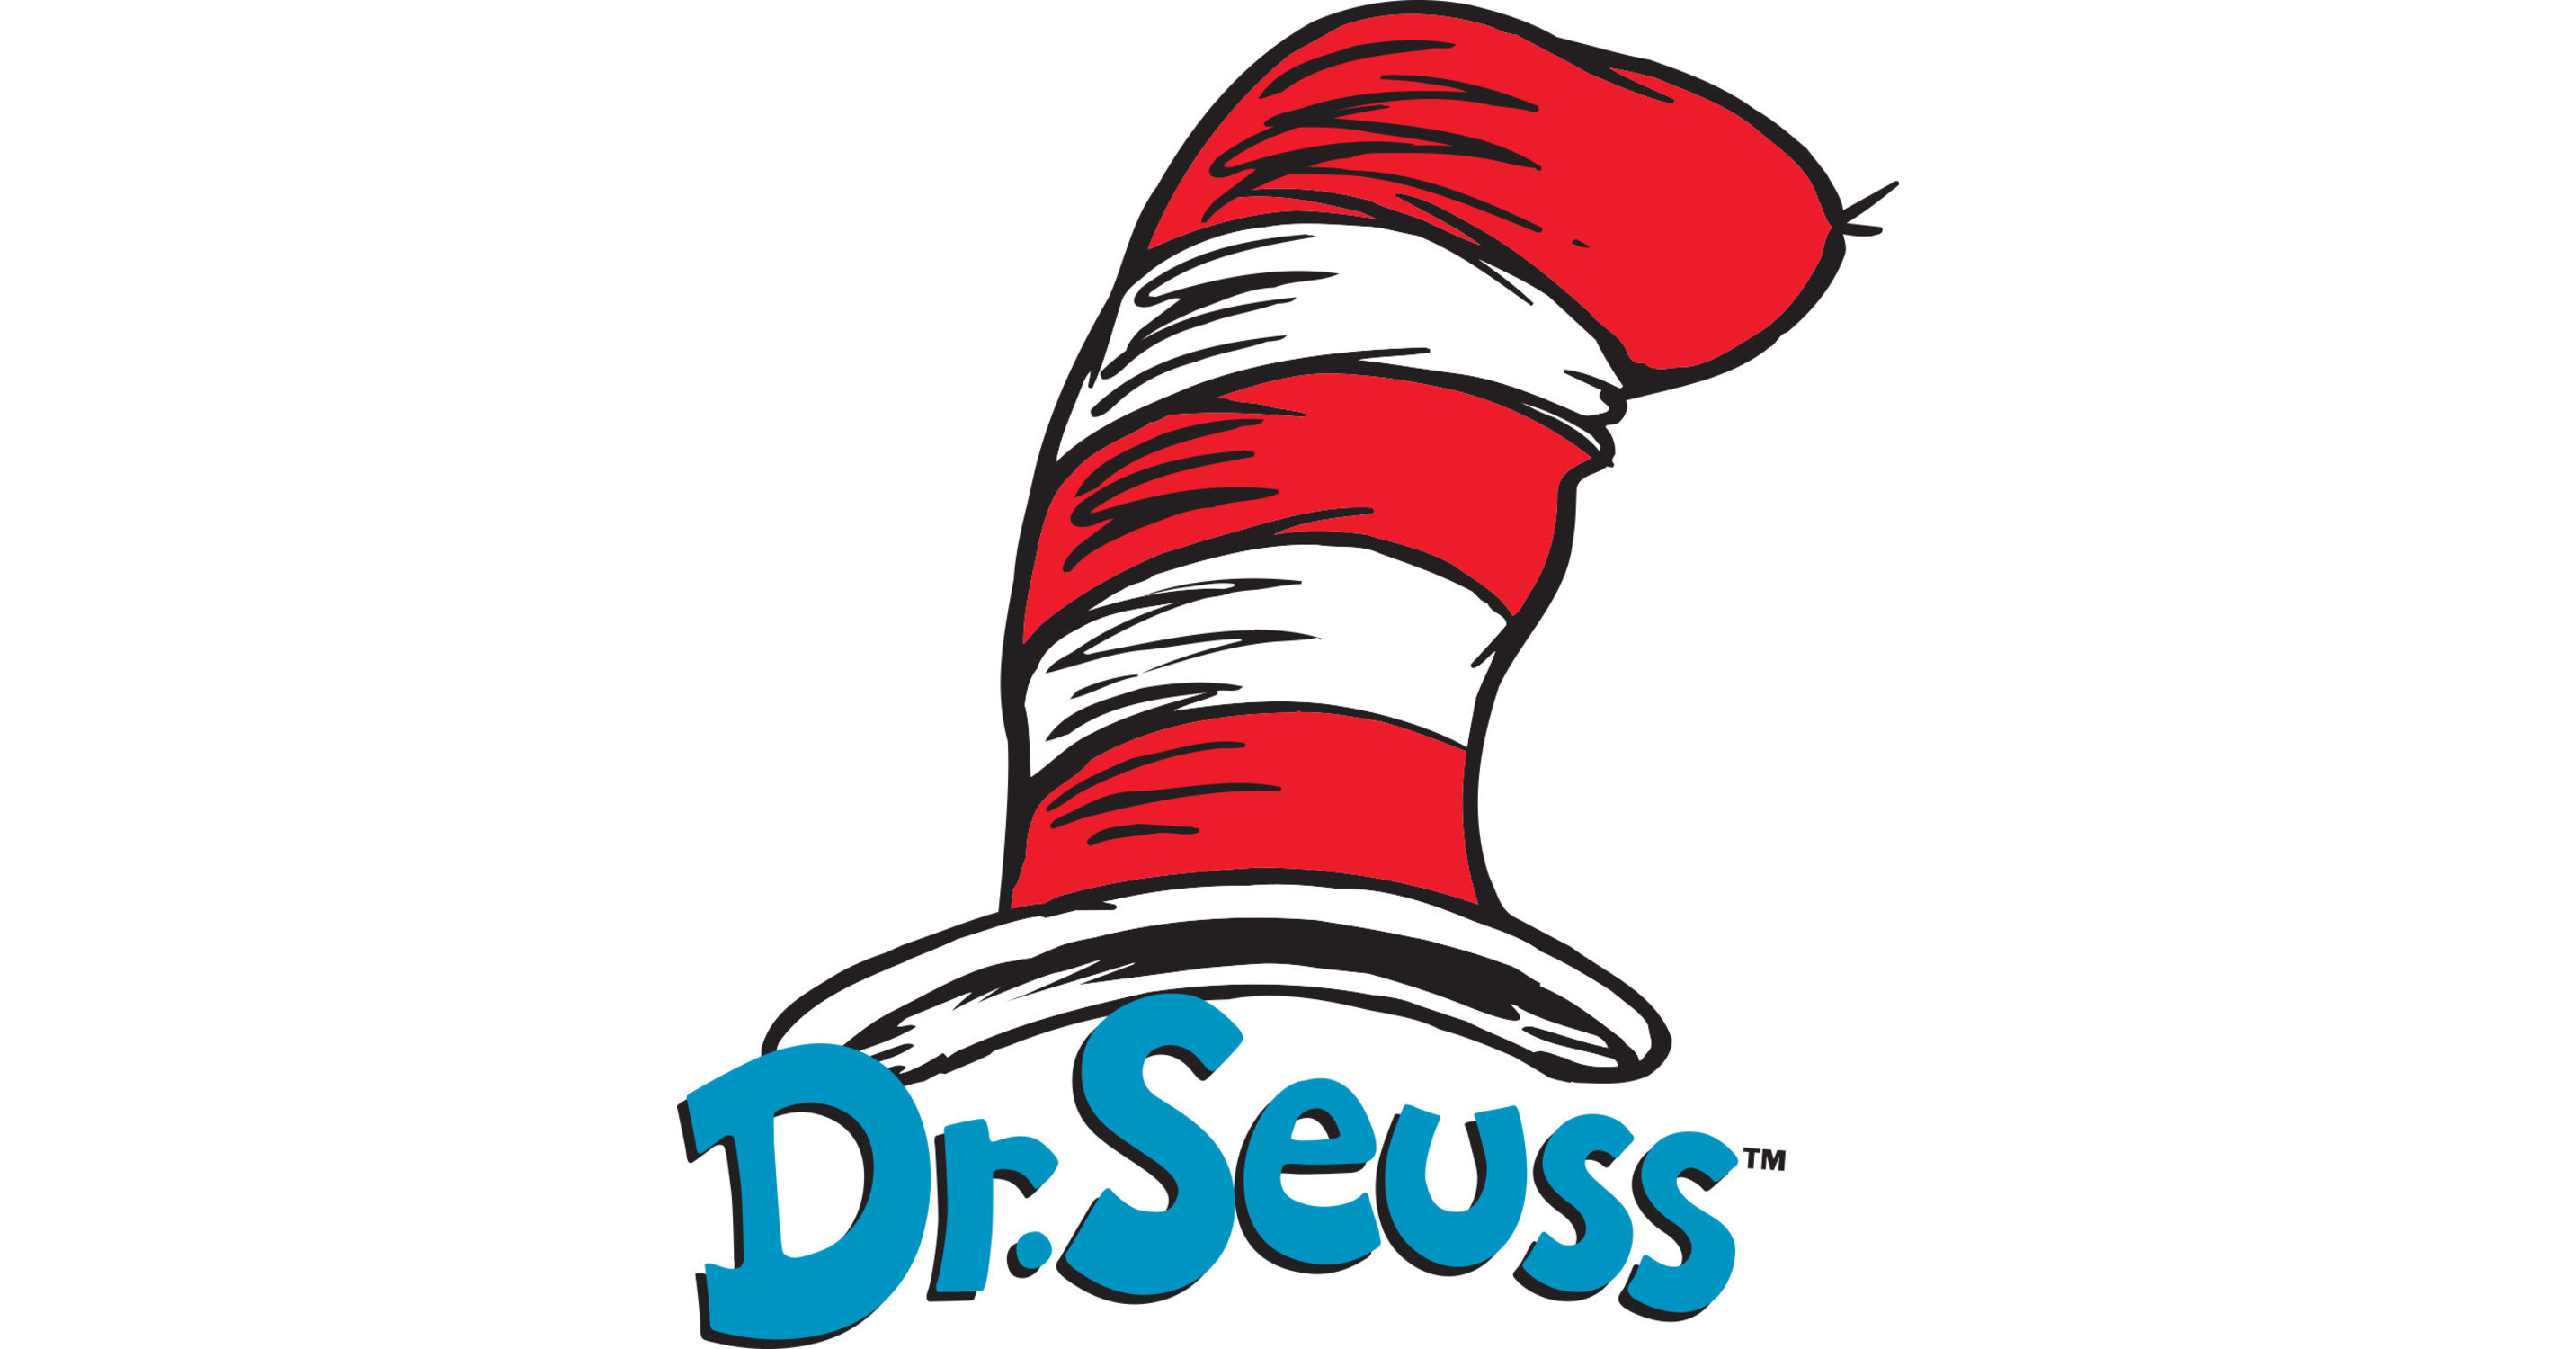 CPLG to represent Dr. Seuss in Europe